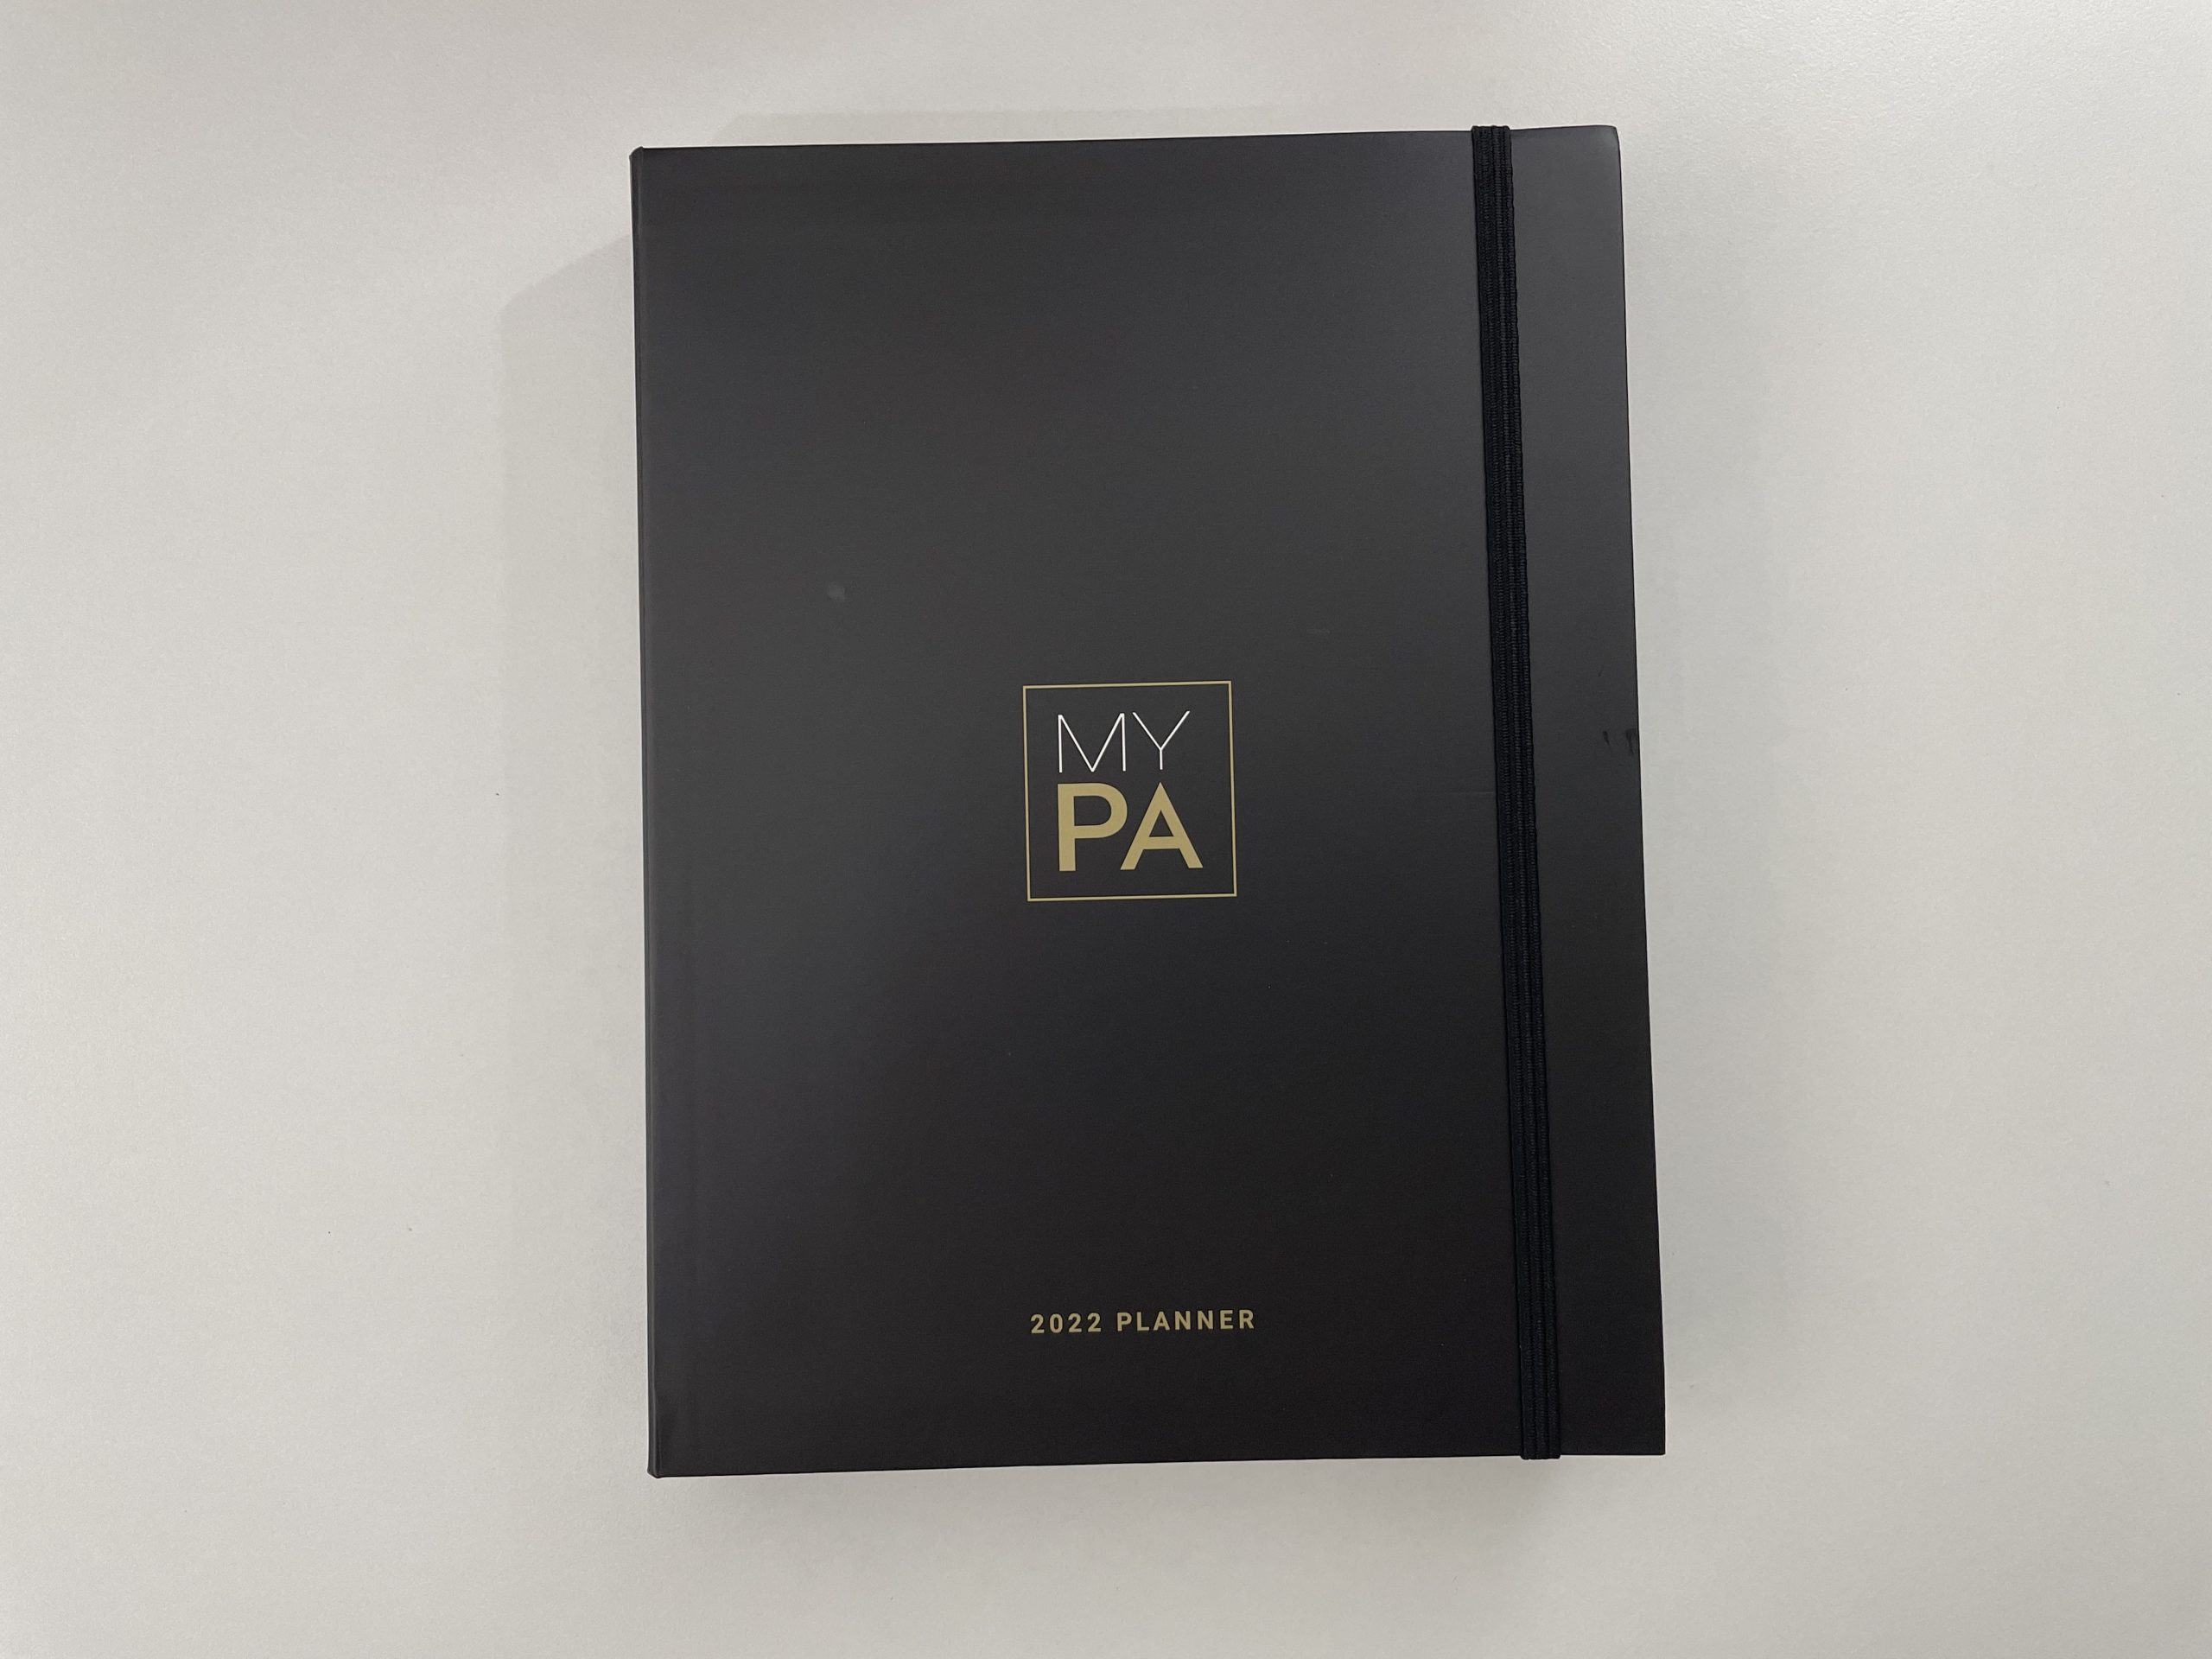 MY PA Planner review business social media weekly planner monthly goals financial marketing products pricing website vertical hourly scheduling layout-min